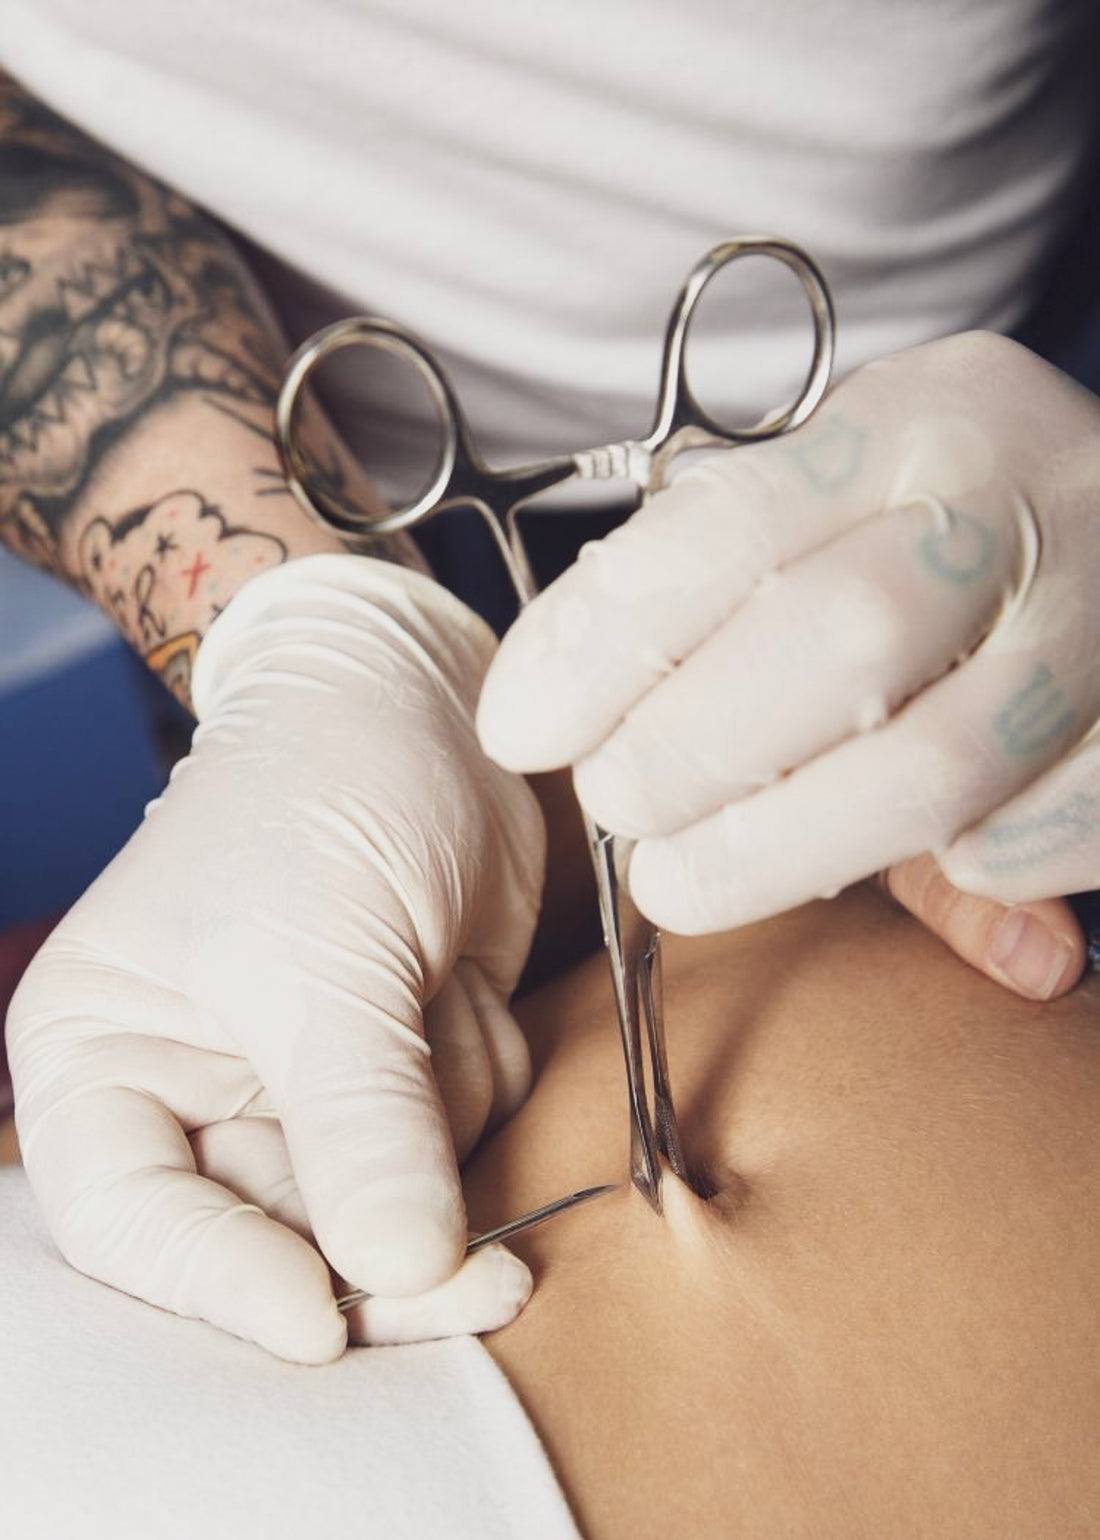 What to consider before getting a belly button piercing.